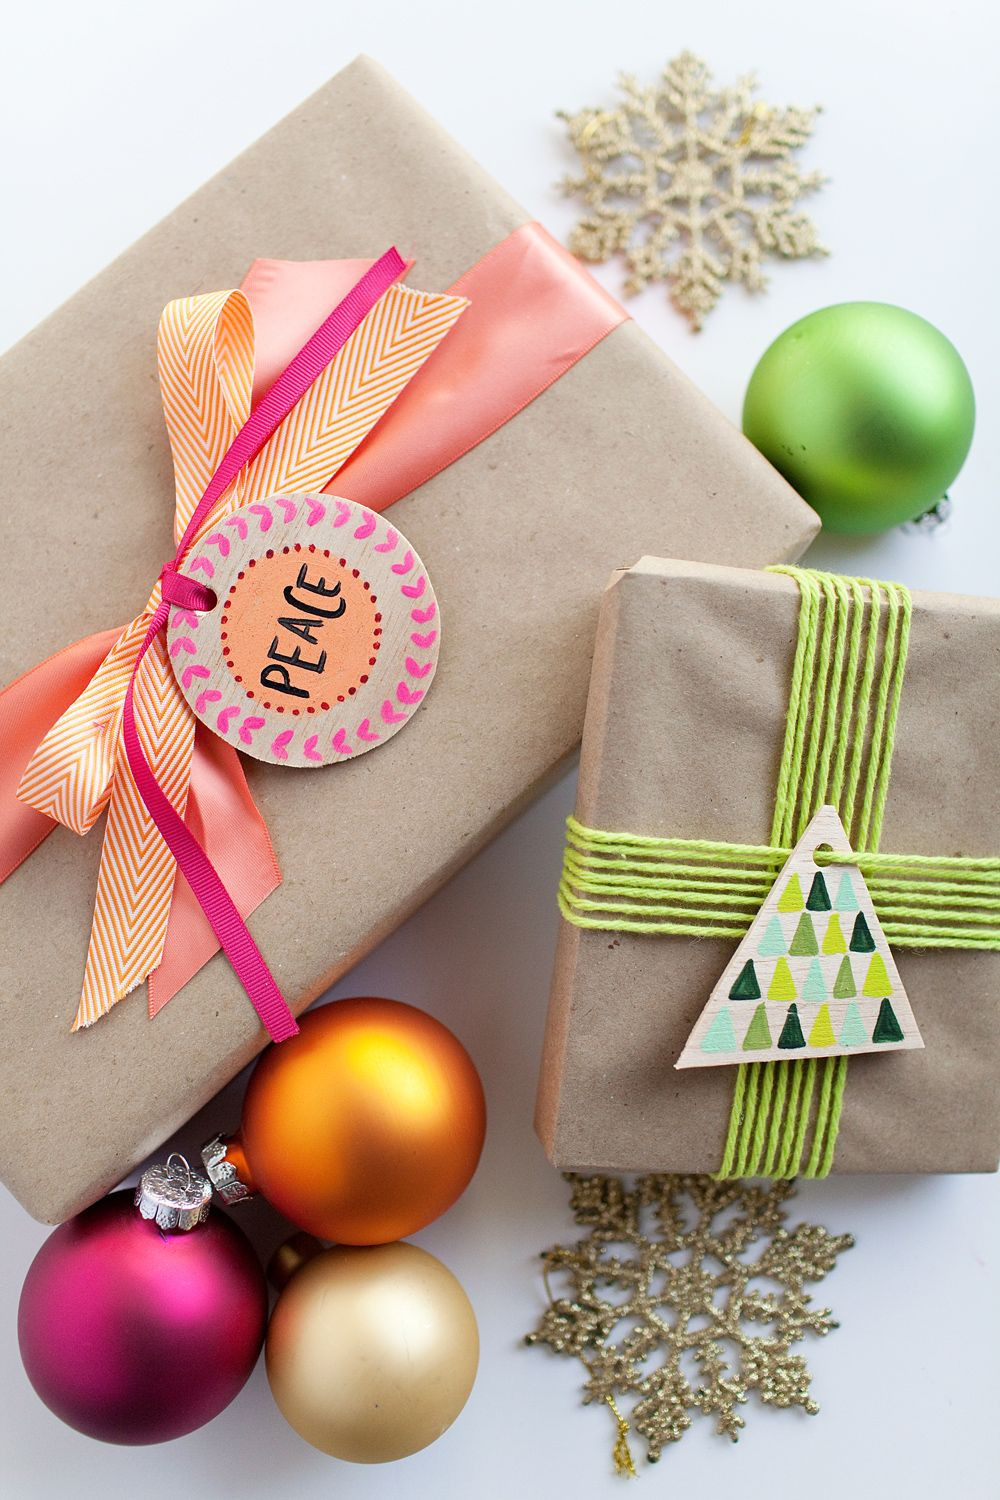 Wood Craft Gifts
 TELL DIY WOOD GIFT TAGS AND ORNAMENTS